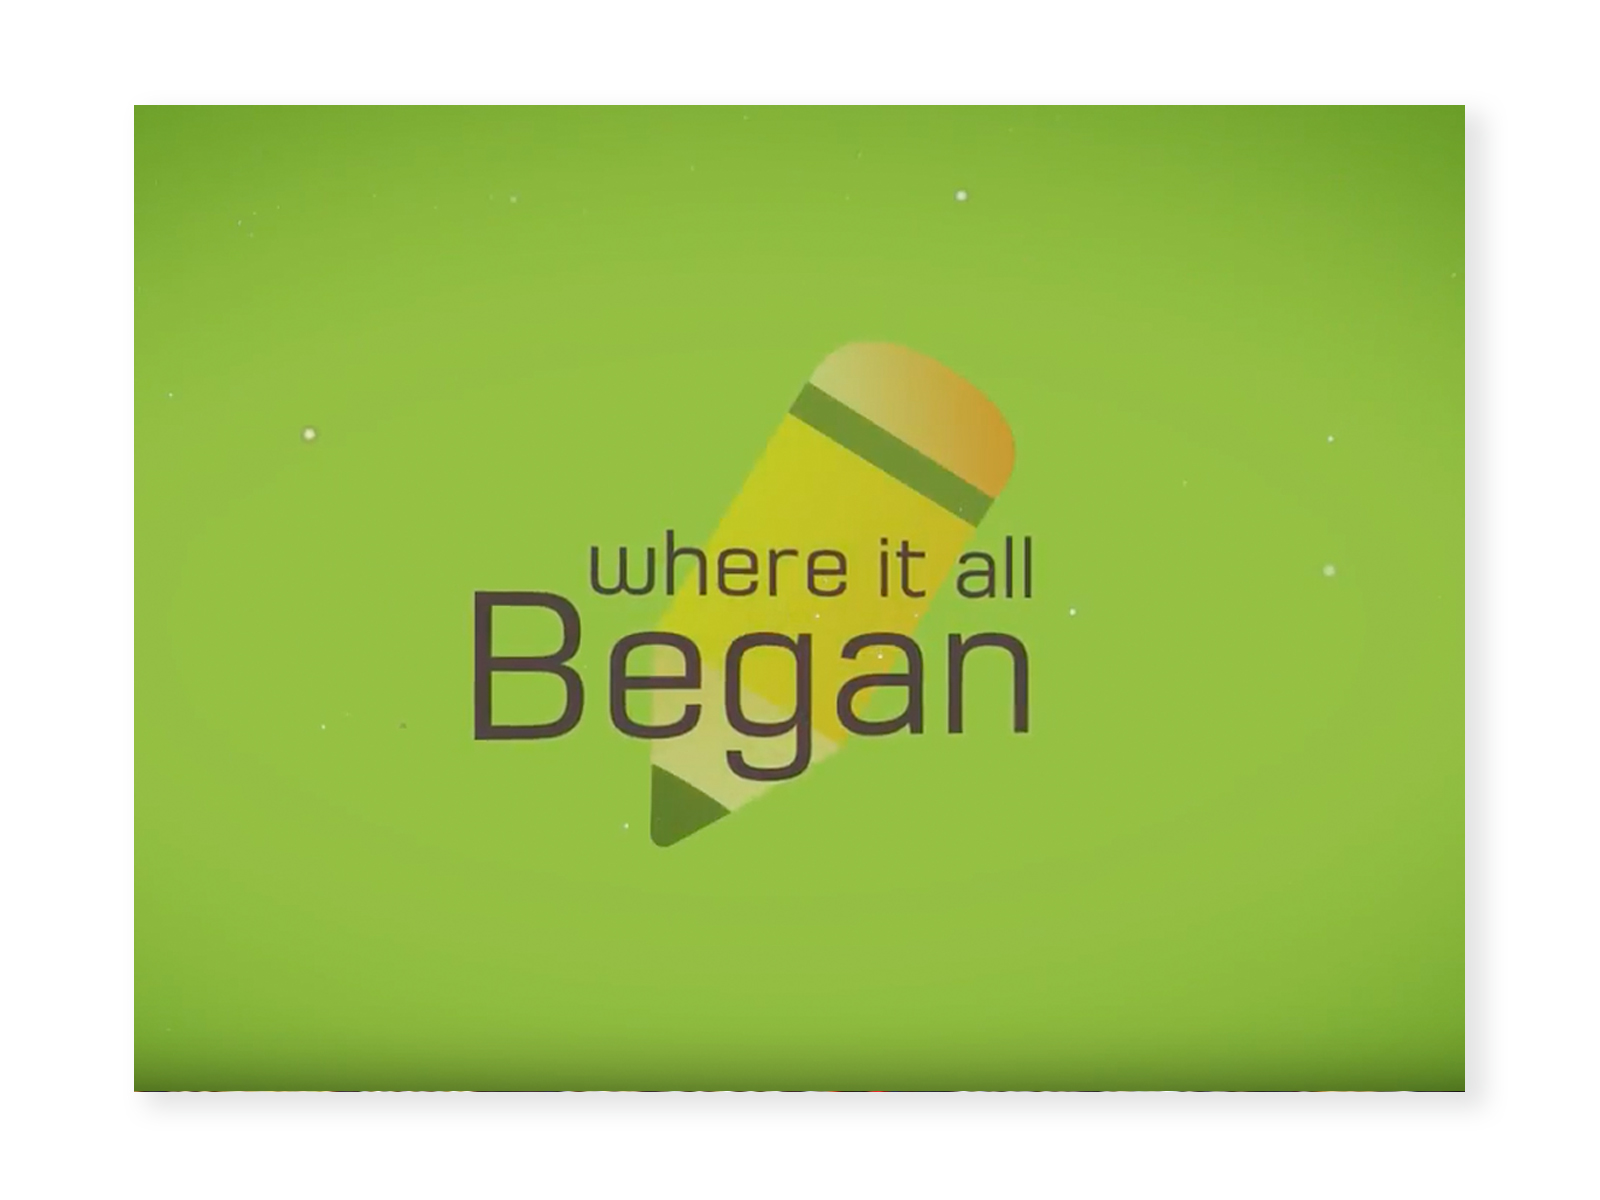 Screenshot from "Where it all Began" video - green background with a graphic of a pencil. The words "Where it all began" are overlayed.